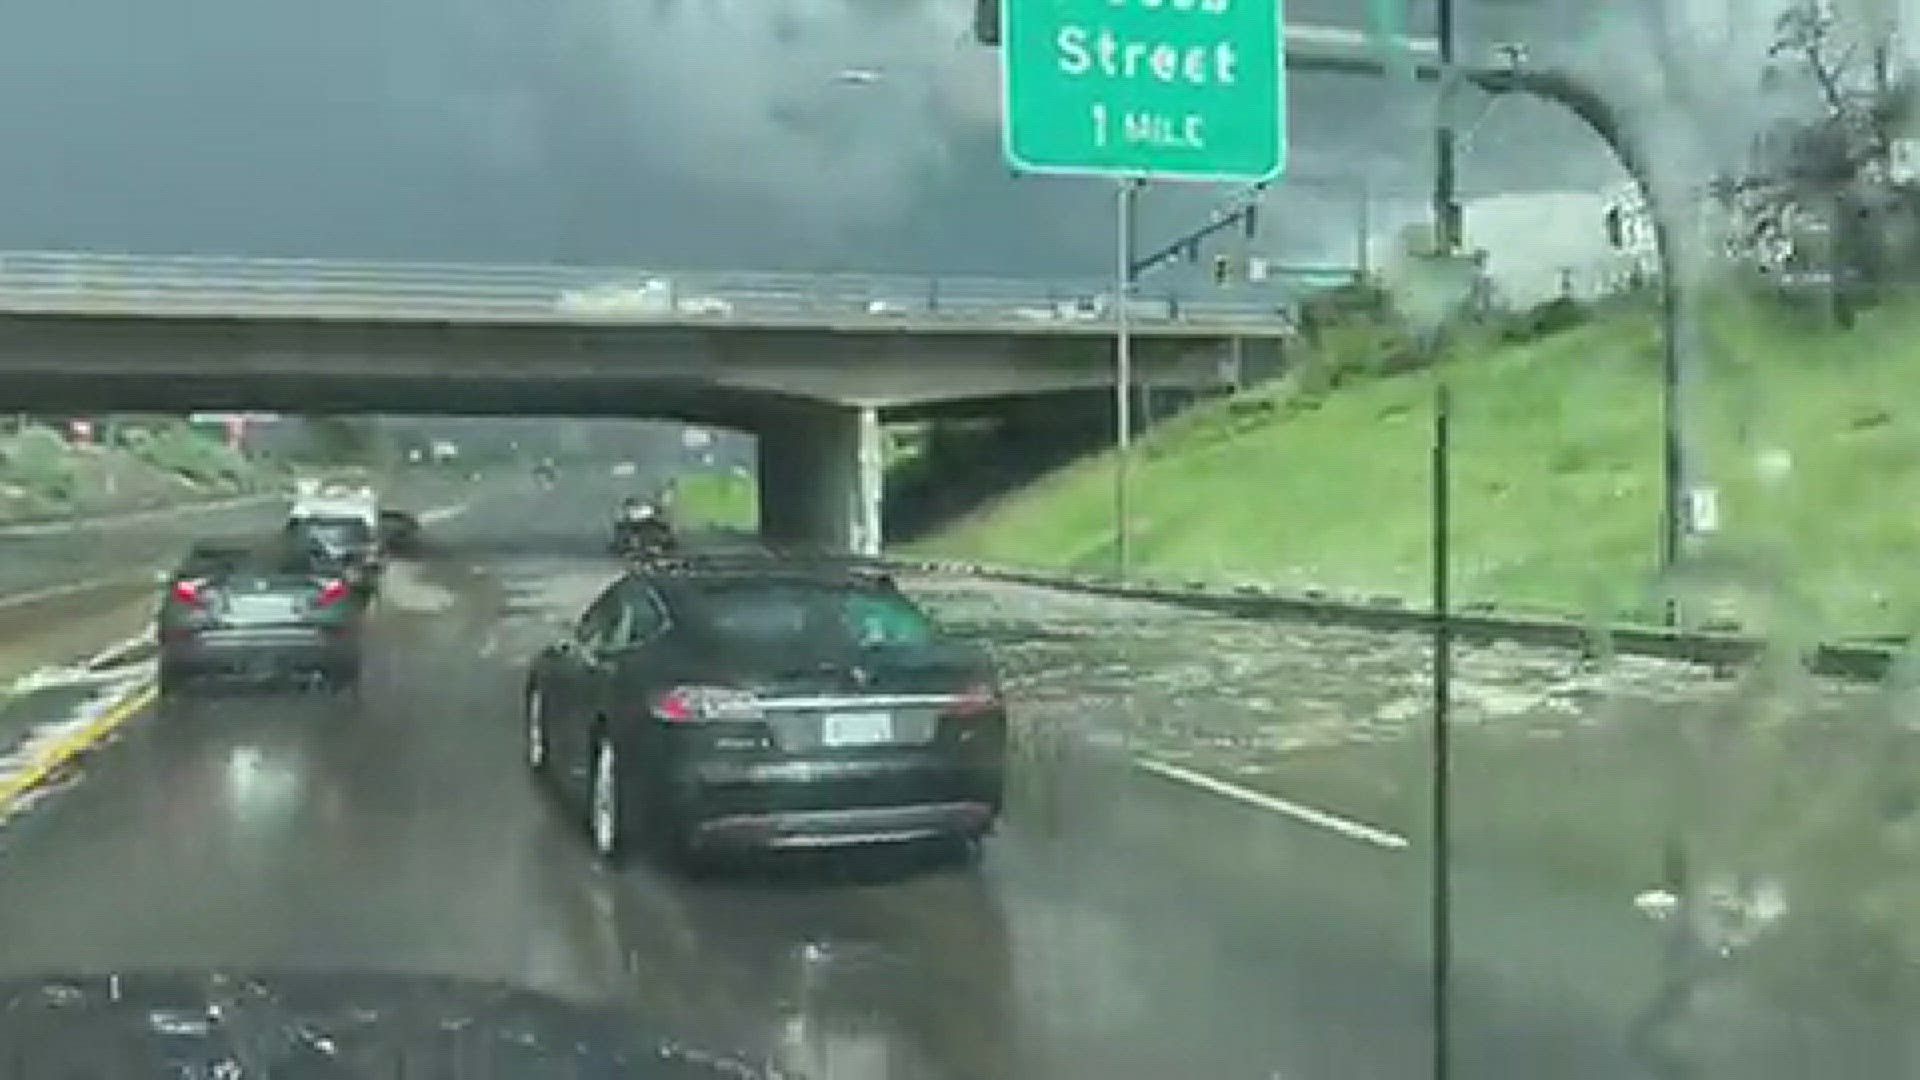 Afternoon commuters were hit with severe weather in the metro area near downtown which caused flooding on interstates and underpasses.